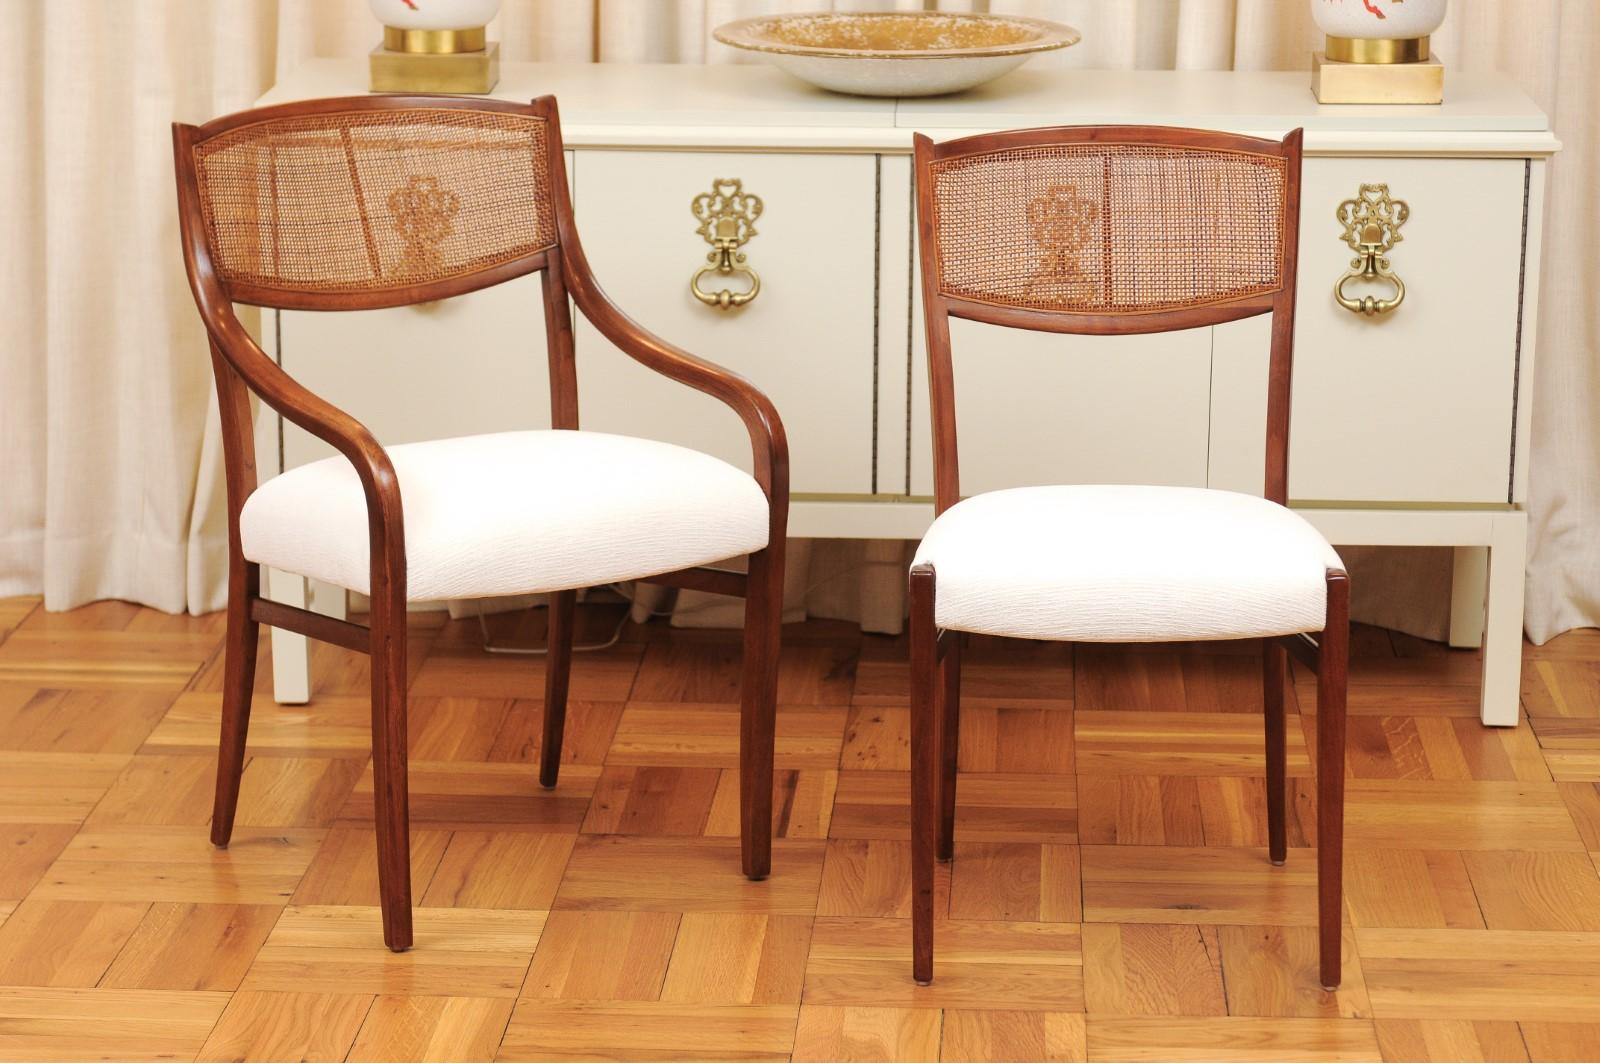 This magnificent set of iconic organic dining chairs is shipped as professionally photographed and described in the listing narrative: Meticulously professionally restored, newly custom upholstered and installation ready. Expert custom upholstery